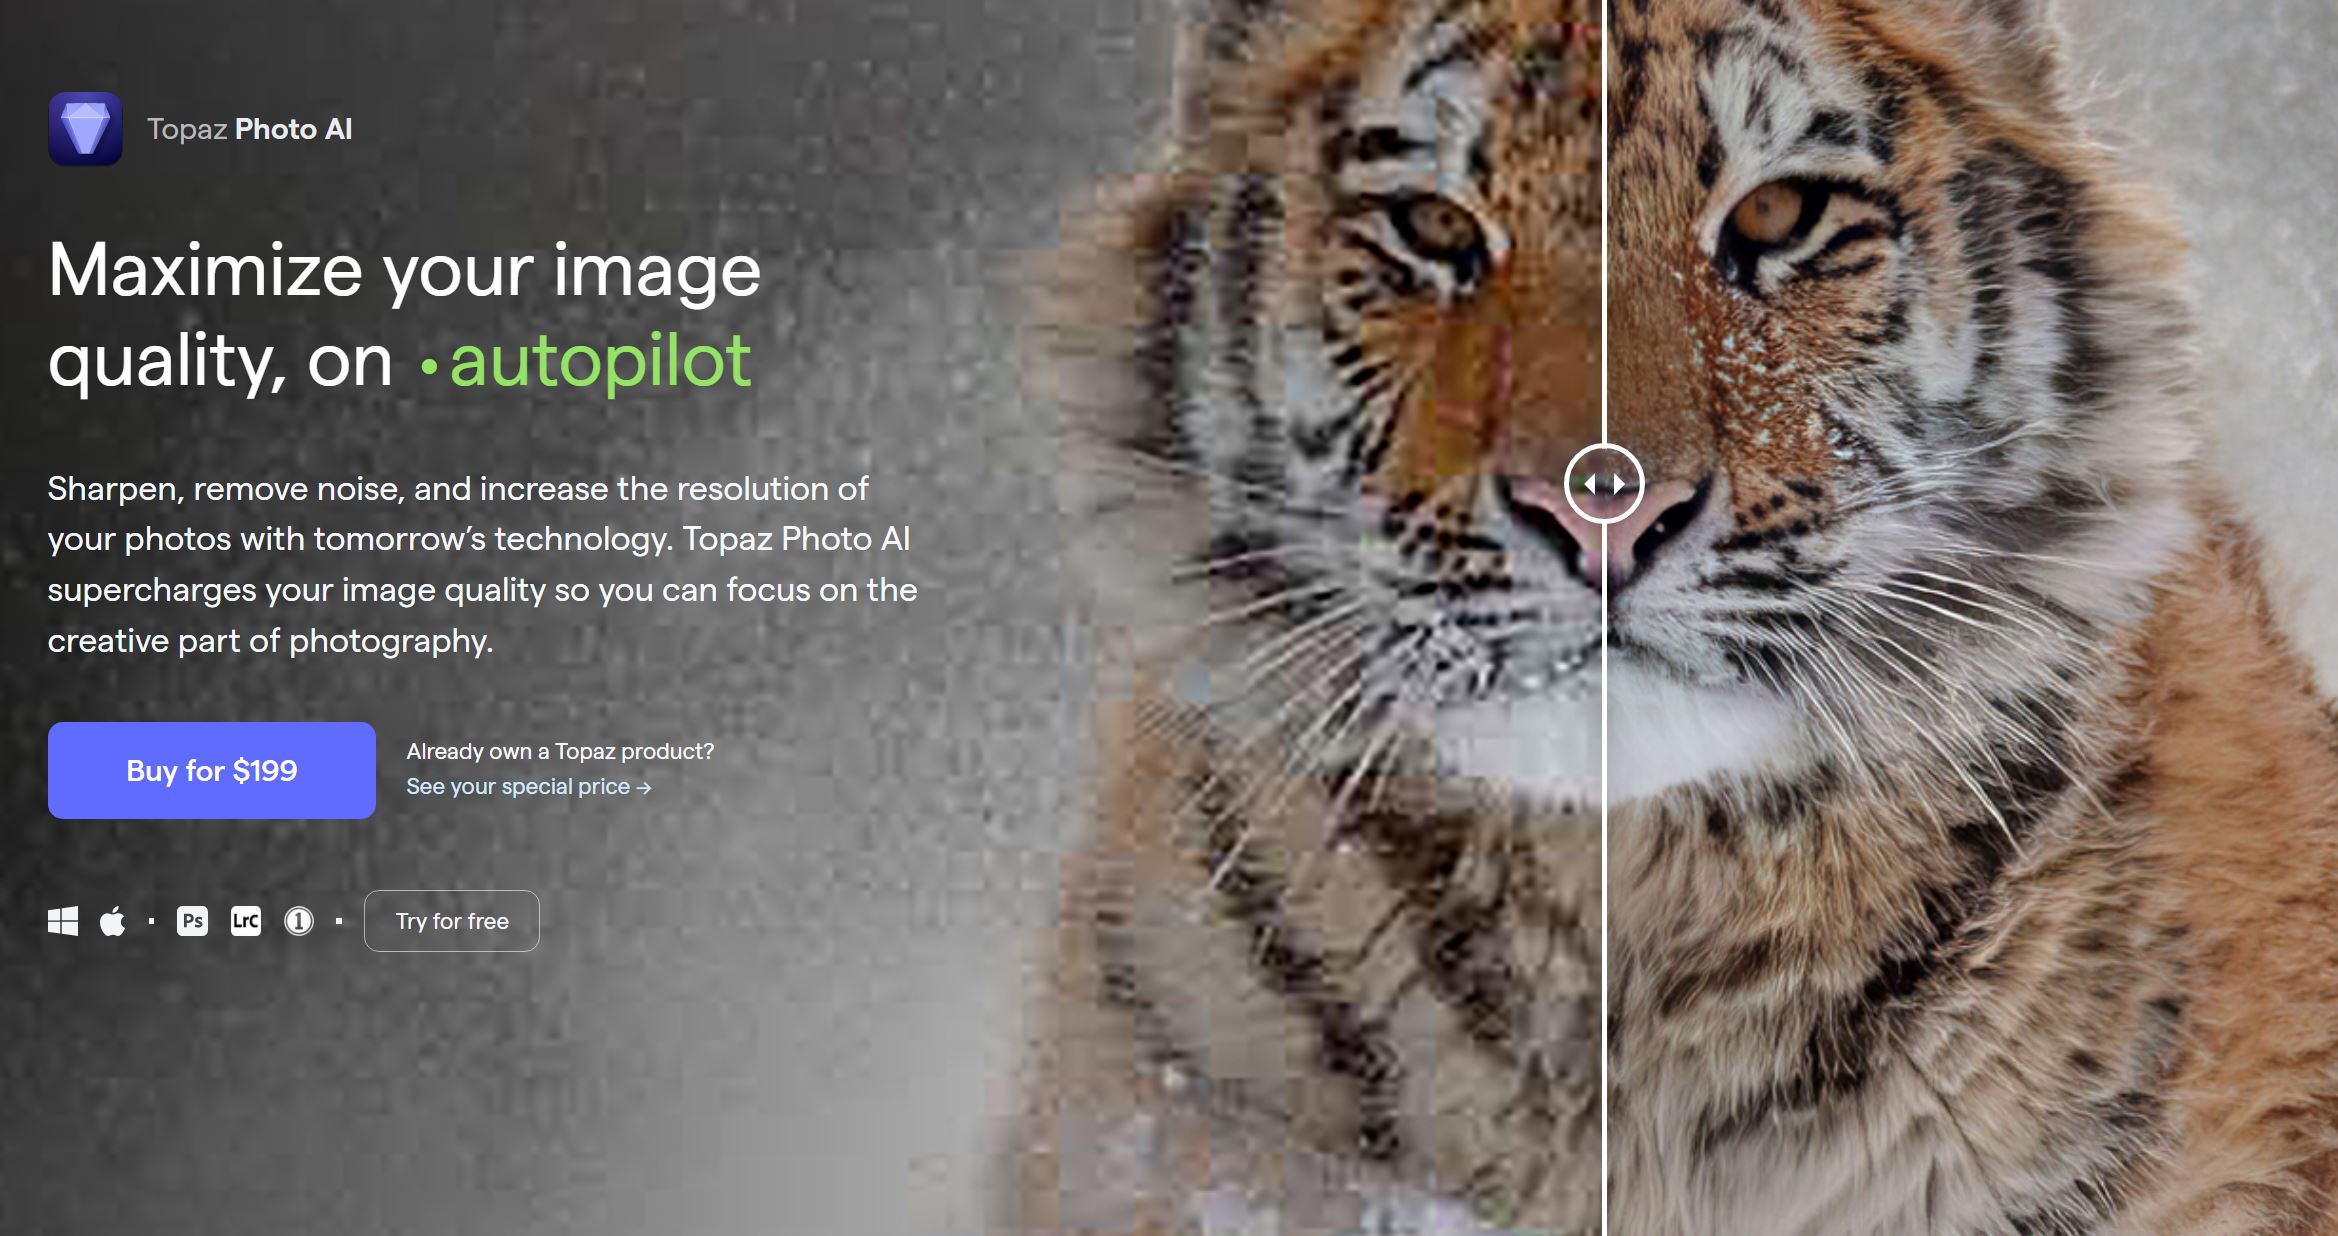 Screenshot of Topaz Photo AI software webpage, showcasing its features and capabilities for AI-driven image enhancement.